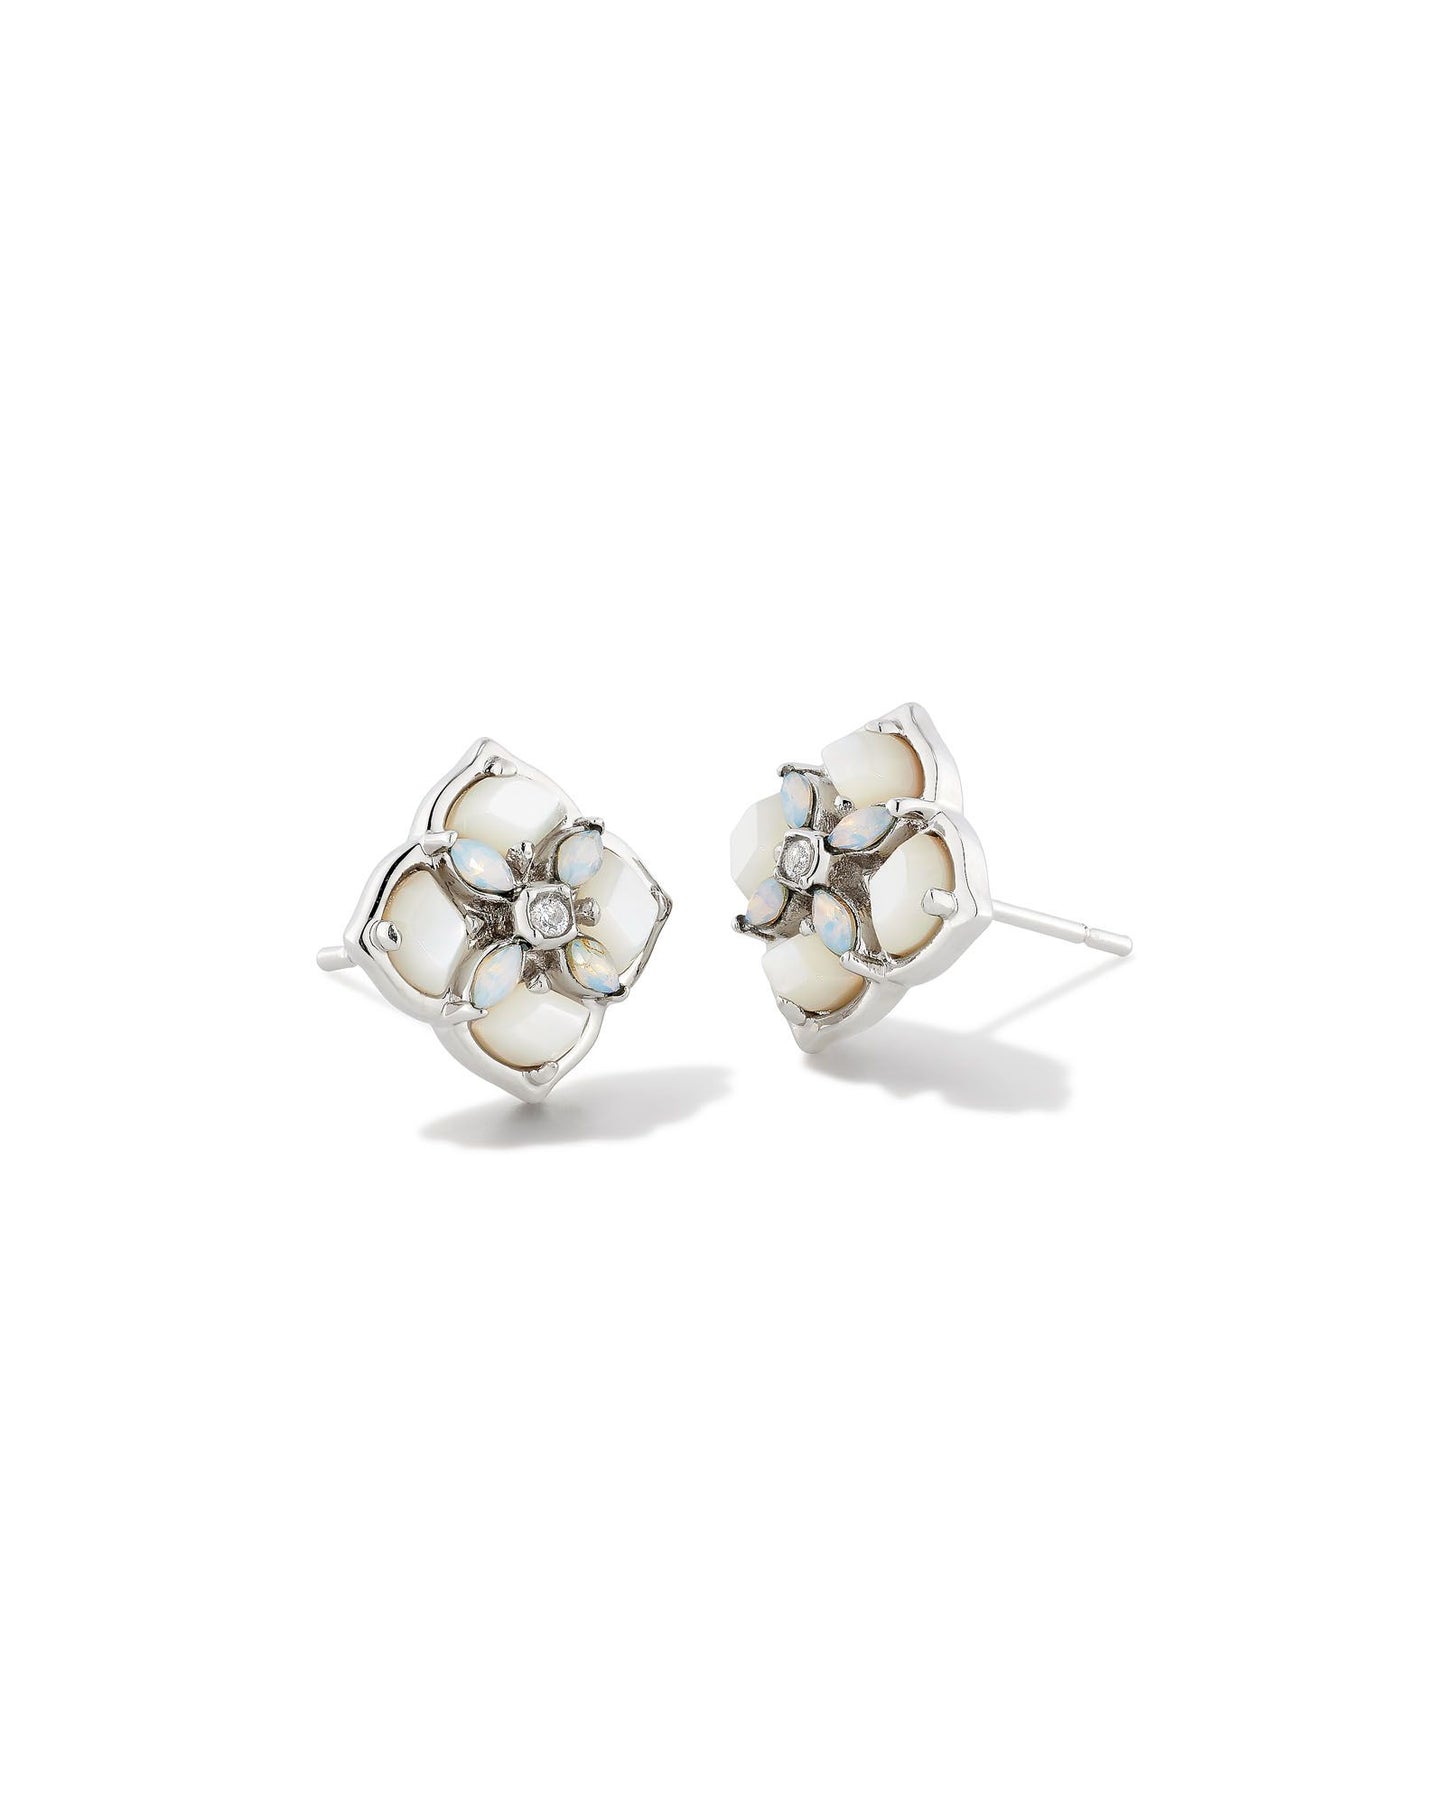 These stud earrings feature subtle stones and gems filled into our logo shape that are sure to lighten up any ensemble. The metal is 24k rhodium plated over brass with white stones. 